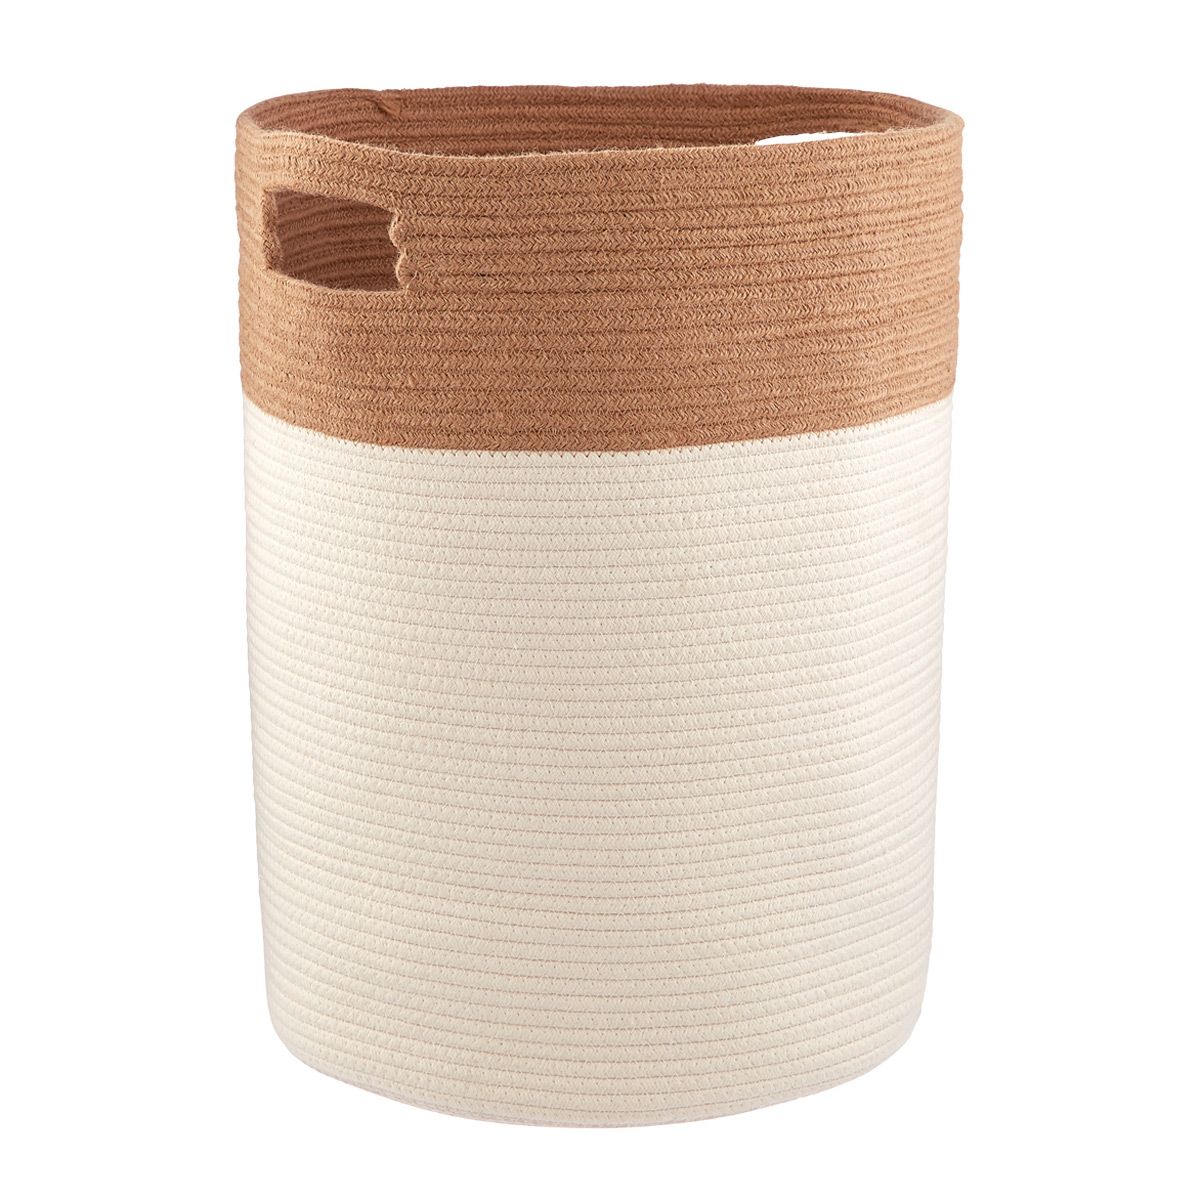 Cotton Rope & Jute Hamper Natural | The Container Store